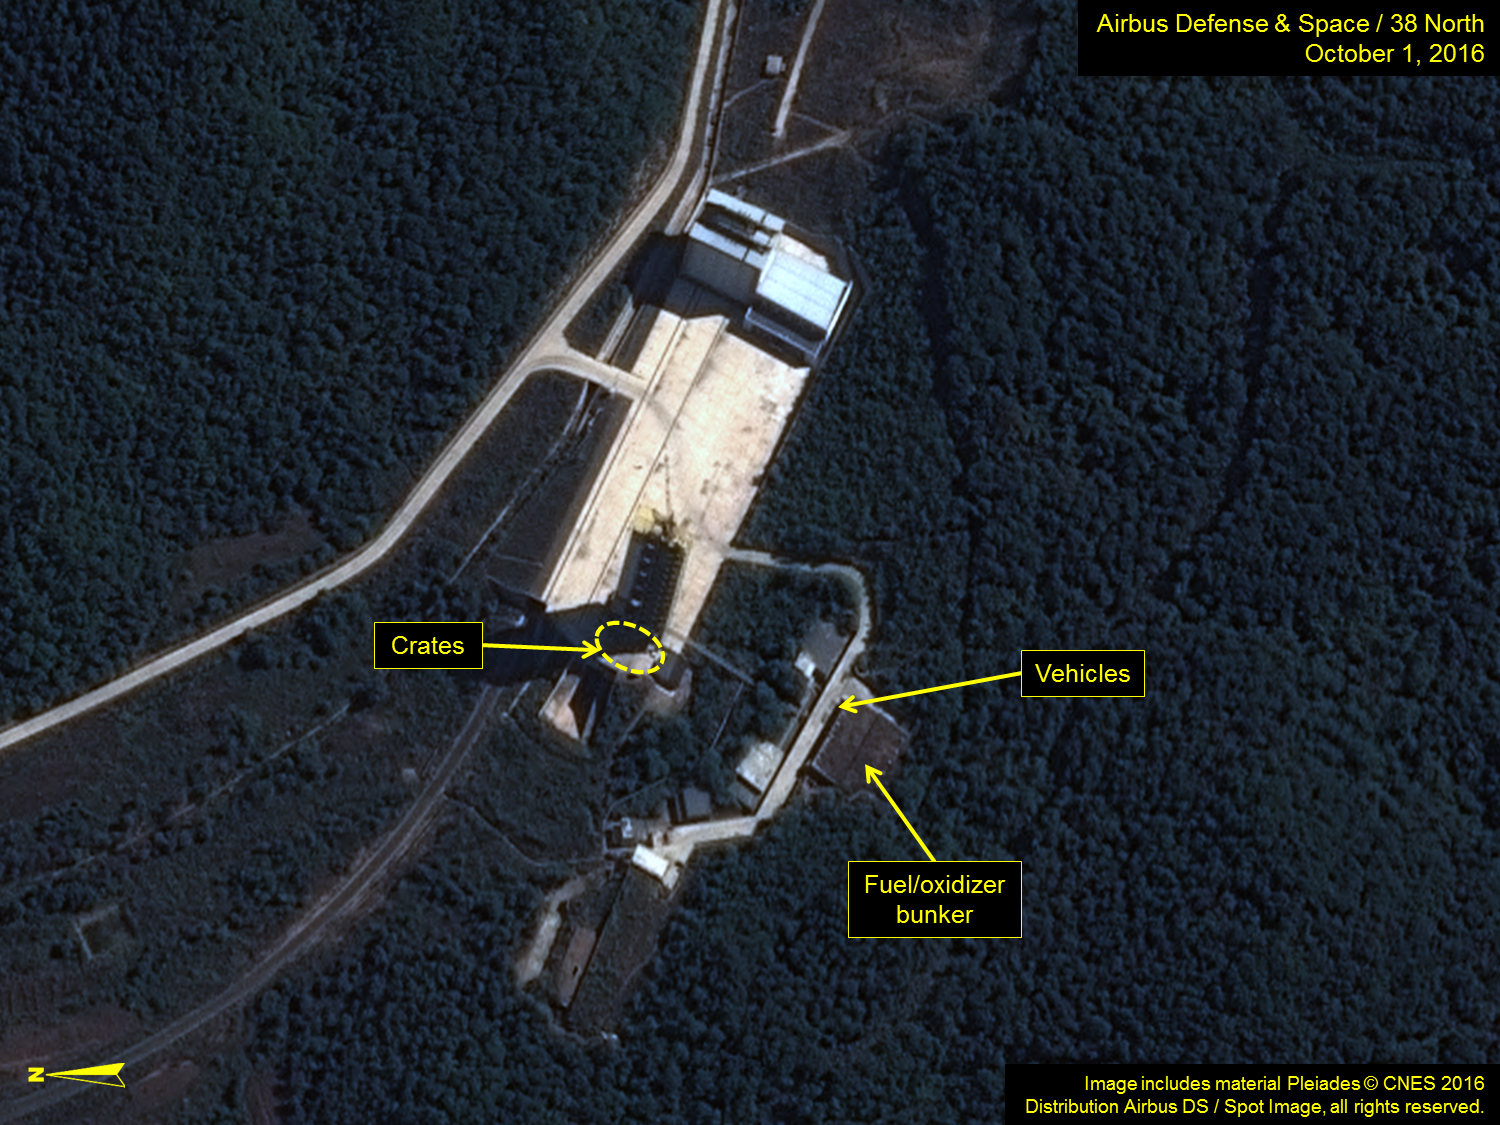 North Korea’s Sohae Launch Facility: Activity at Launch Pad and Rocket Engine Test Area